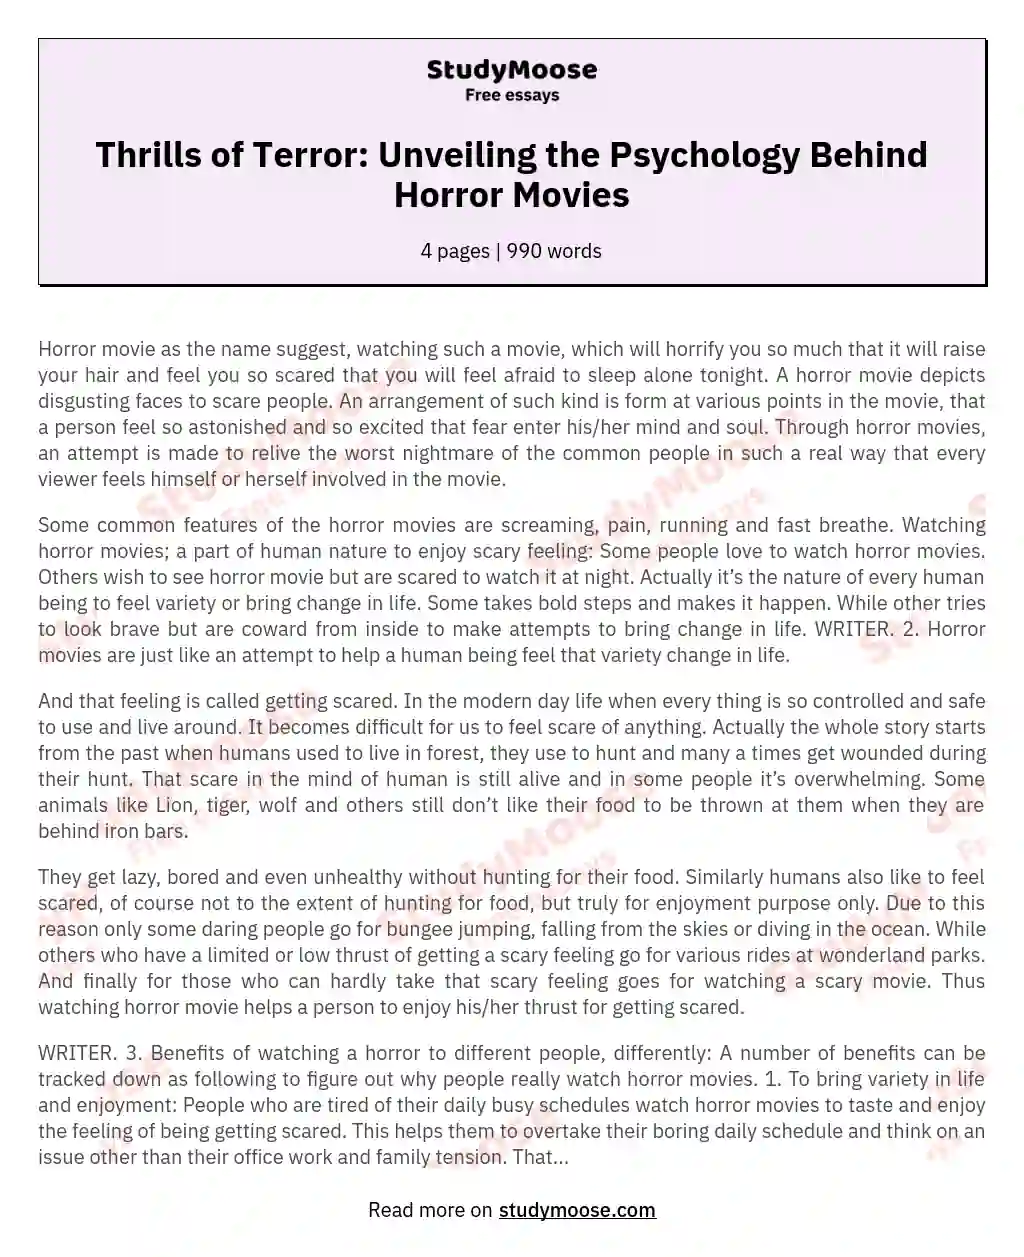 Thrills of Terror: Unveiling the Psychology Behind Horror Movies essay